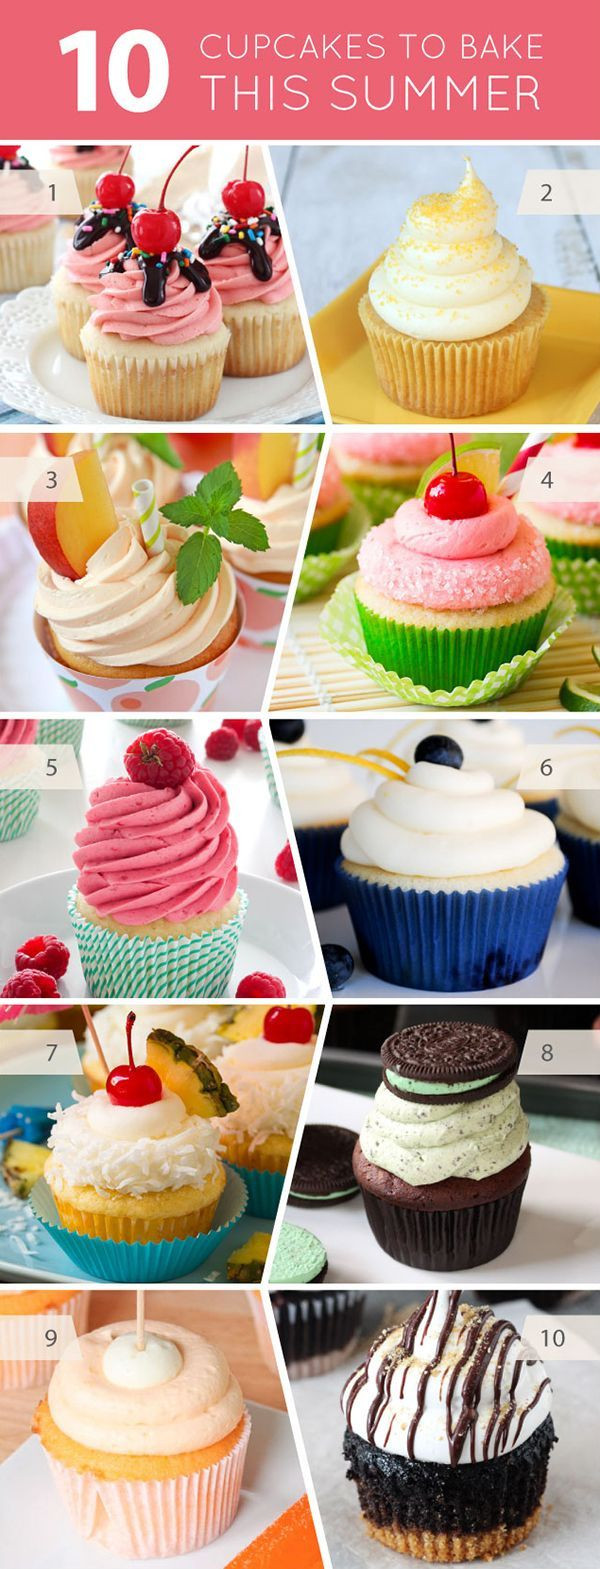 Summer Cupcakes Flavors
 25 best ideas about Summer cupcakes on Pinterest